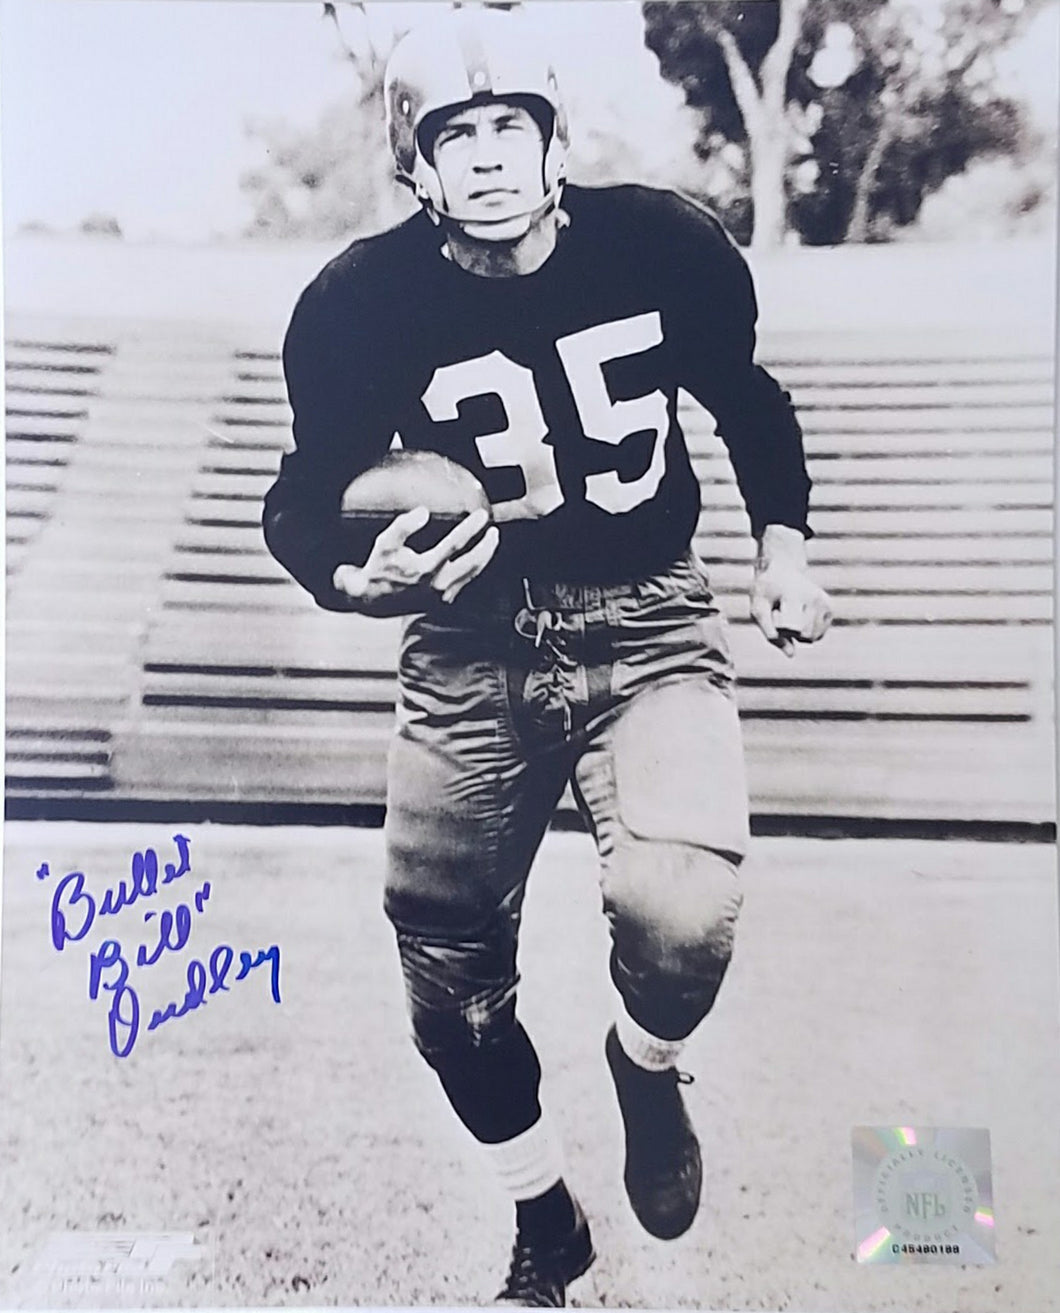 Bullet Bill Dudley  Signed Autographed 8x10